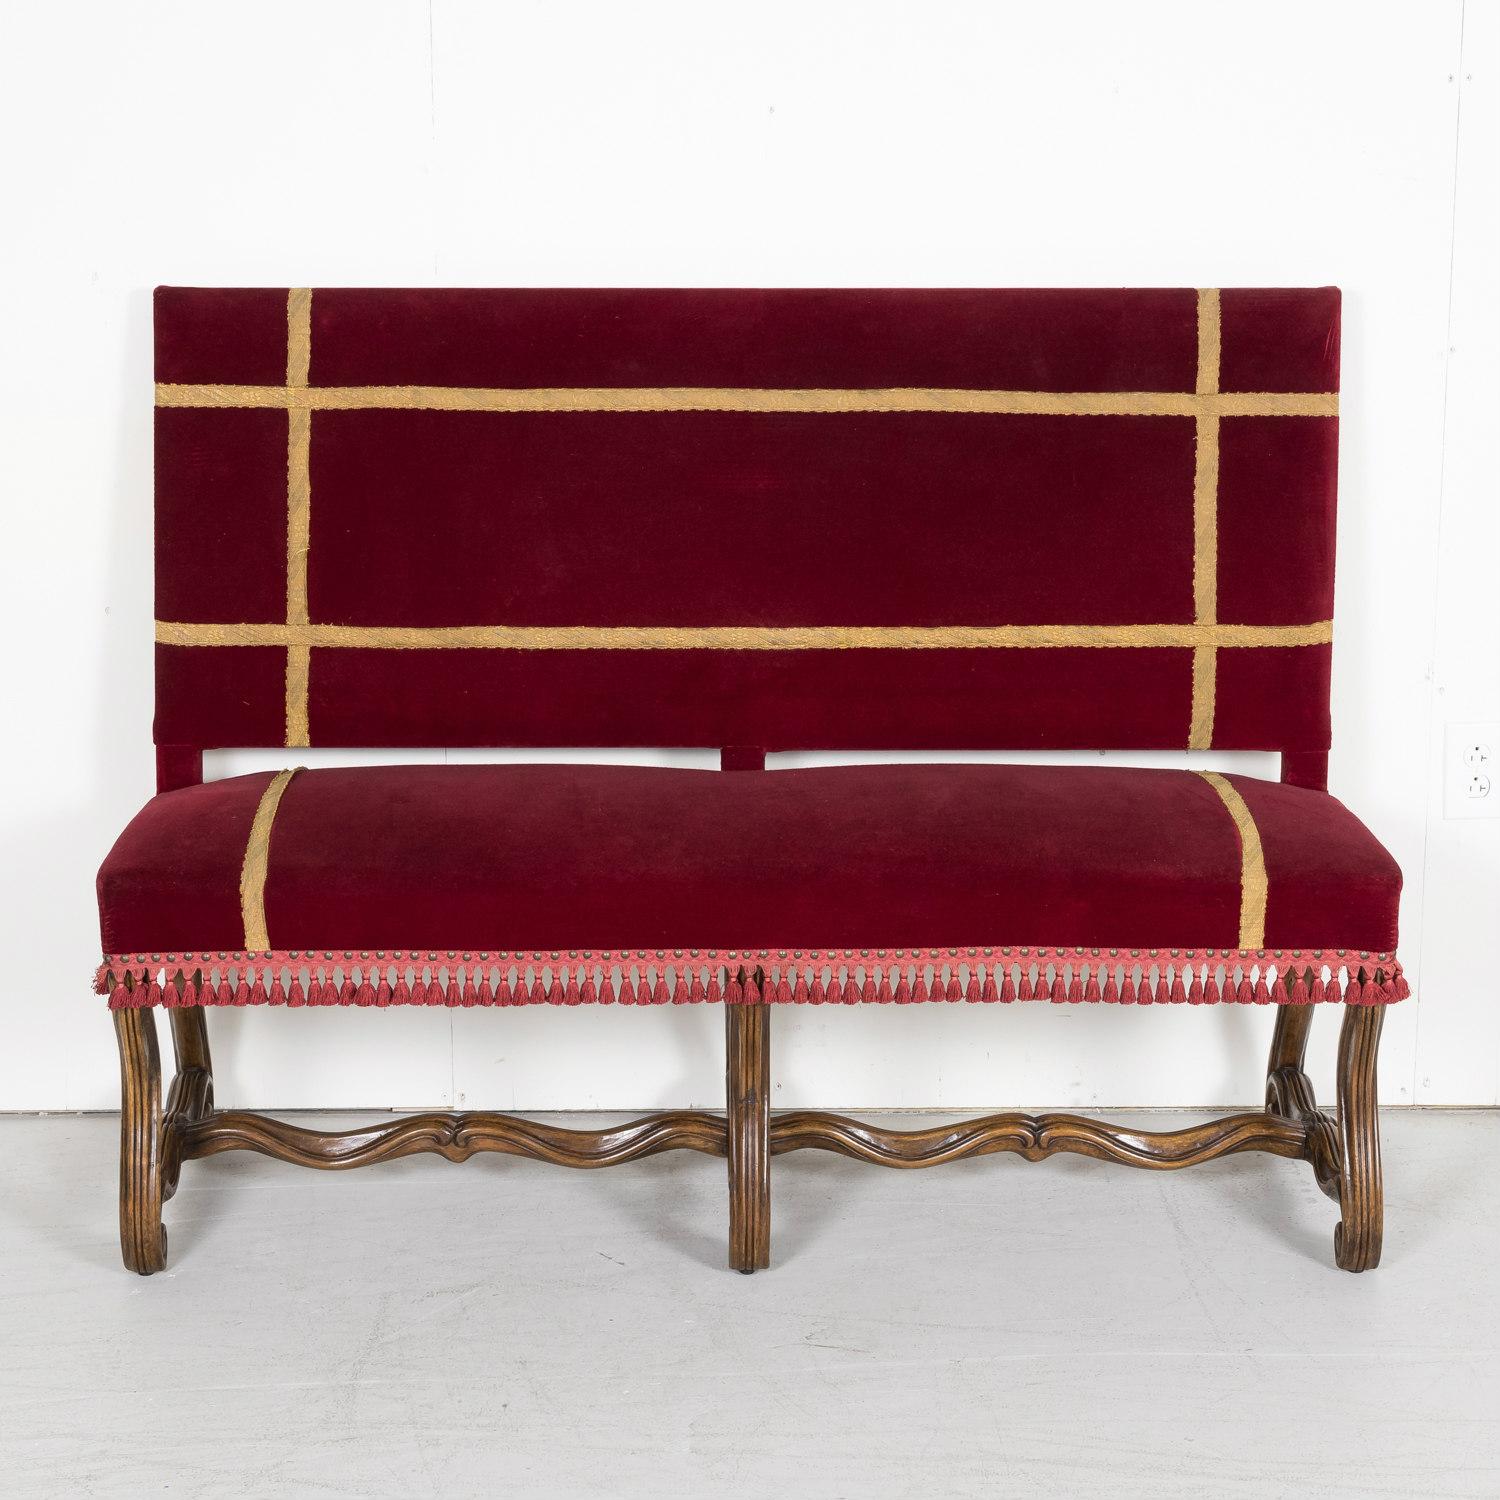 Late 19th Century 19th Century Upholstered Spanish Catalan Bench  For Sale